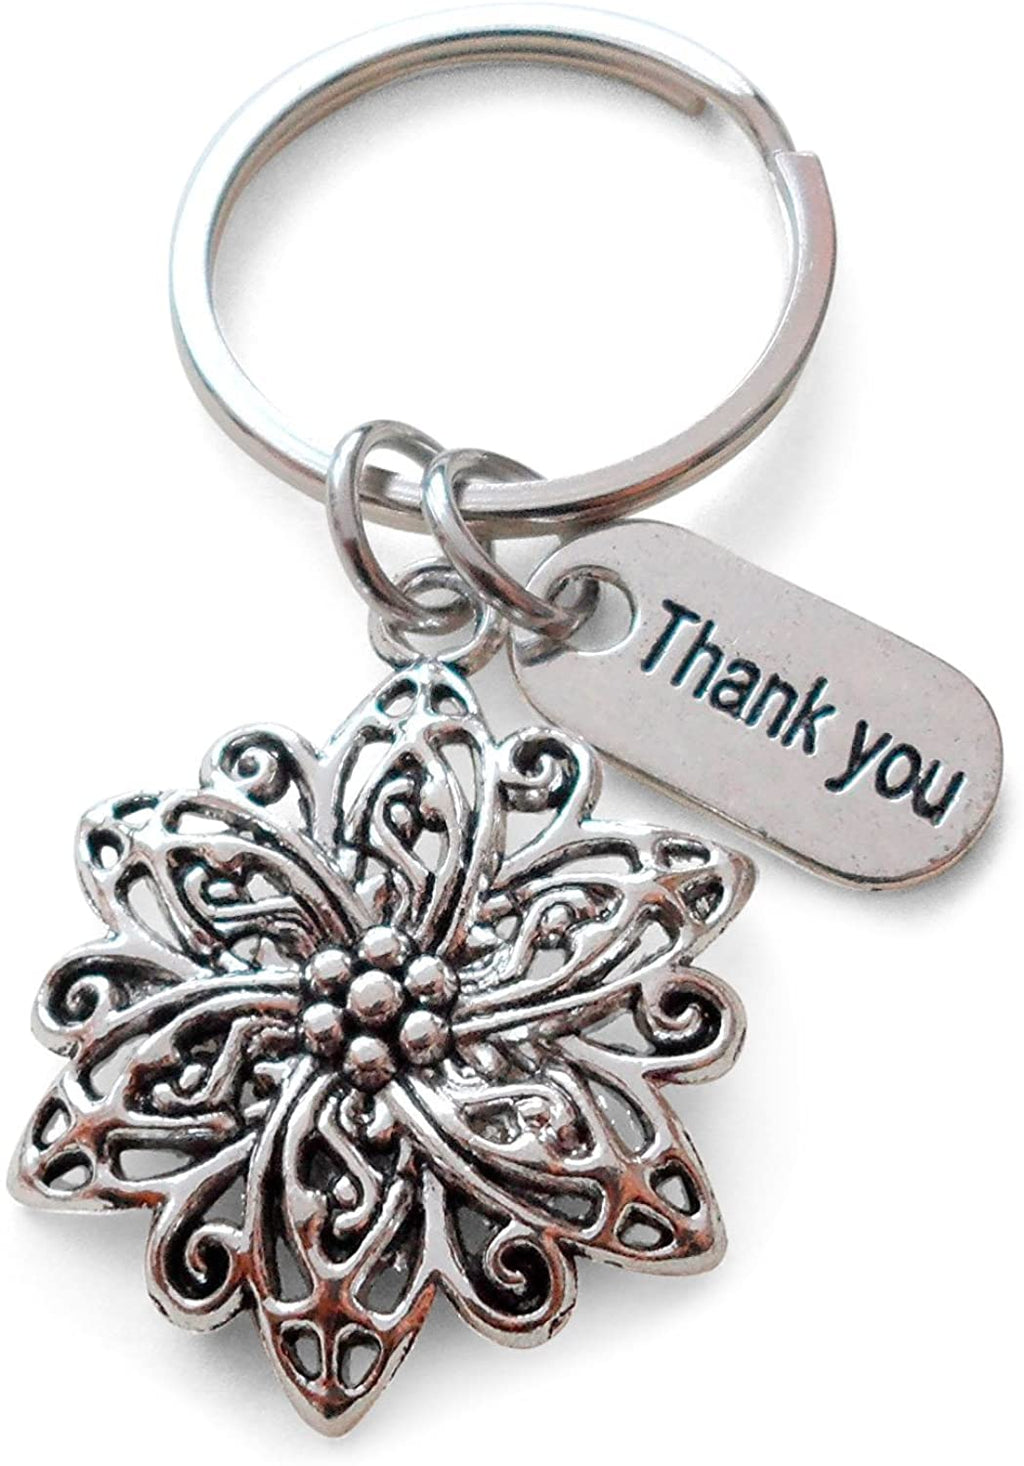 Teacher Appreciation Gifts • "Thank You" Tag & Flower Charm Keychain by JewelryEveryday w/ "Thanks for helping our school bloom!" Card